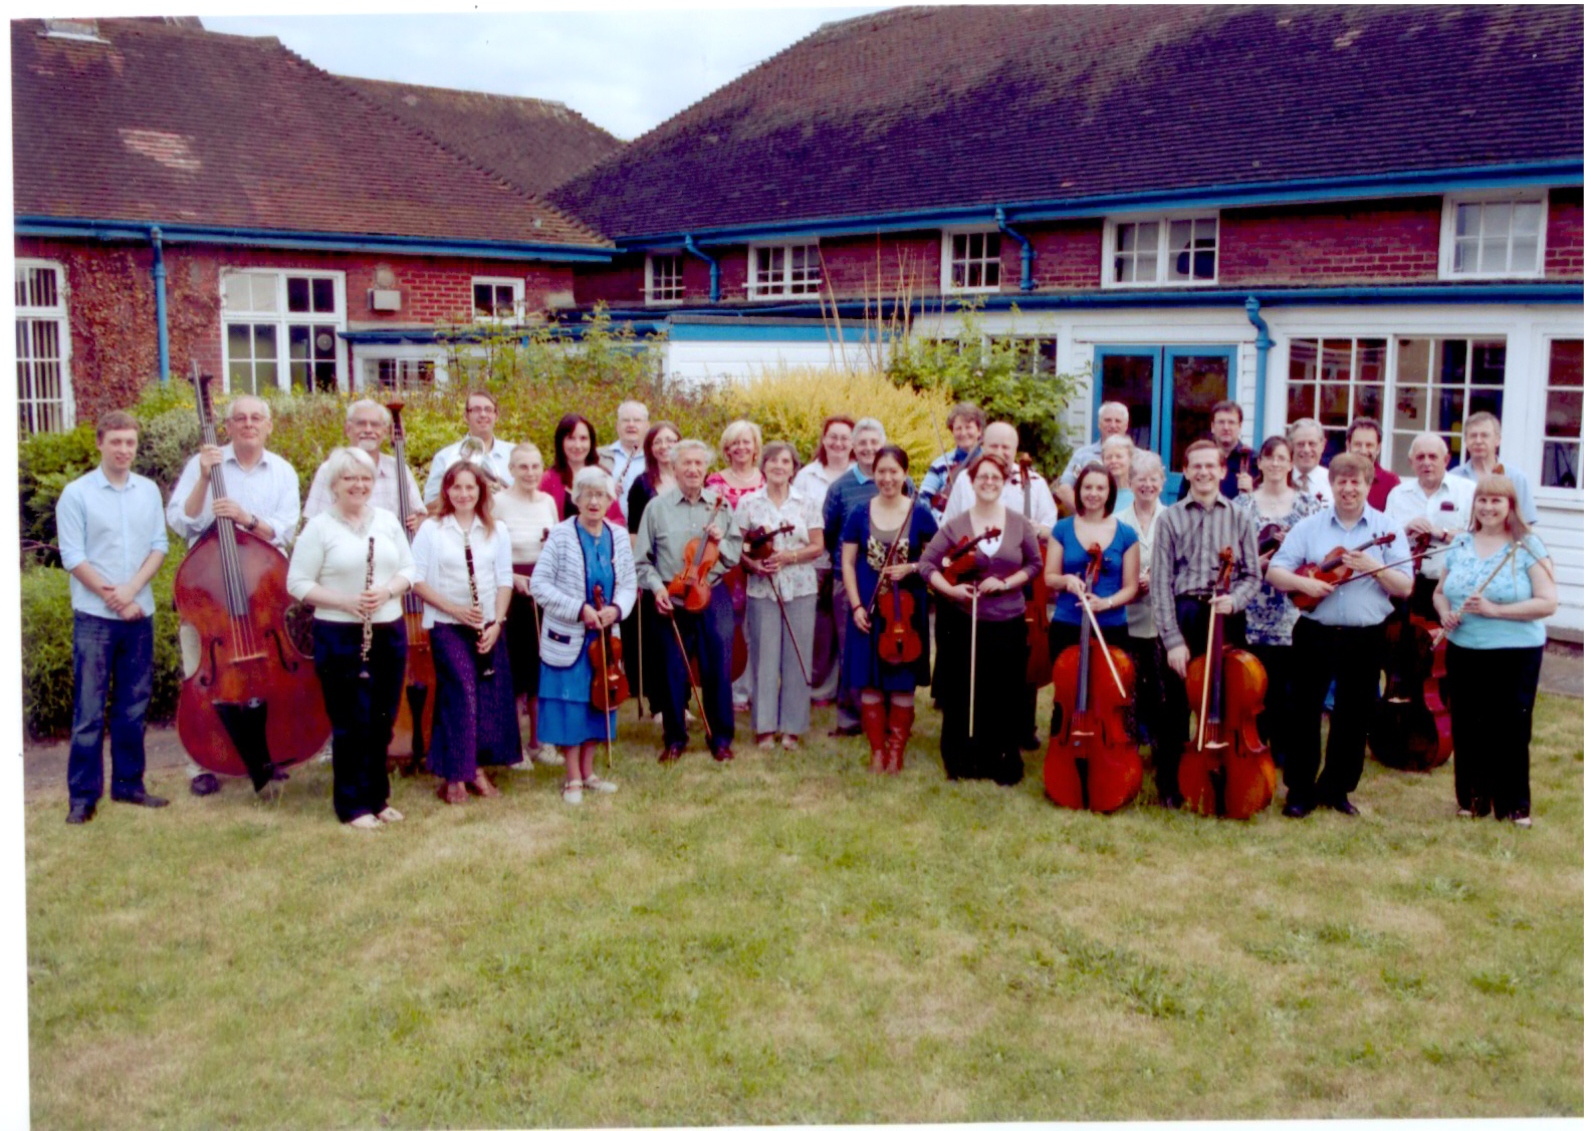 The Orchestra at the 'Bell' School June 2010 